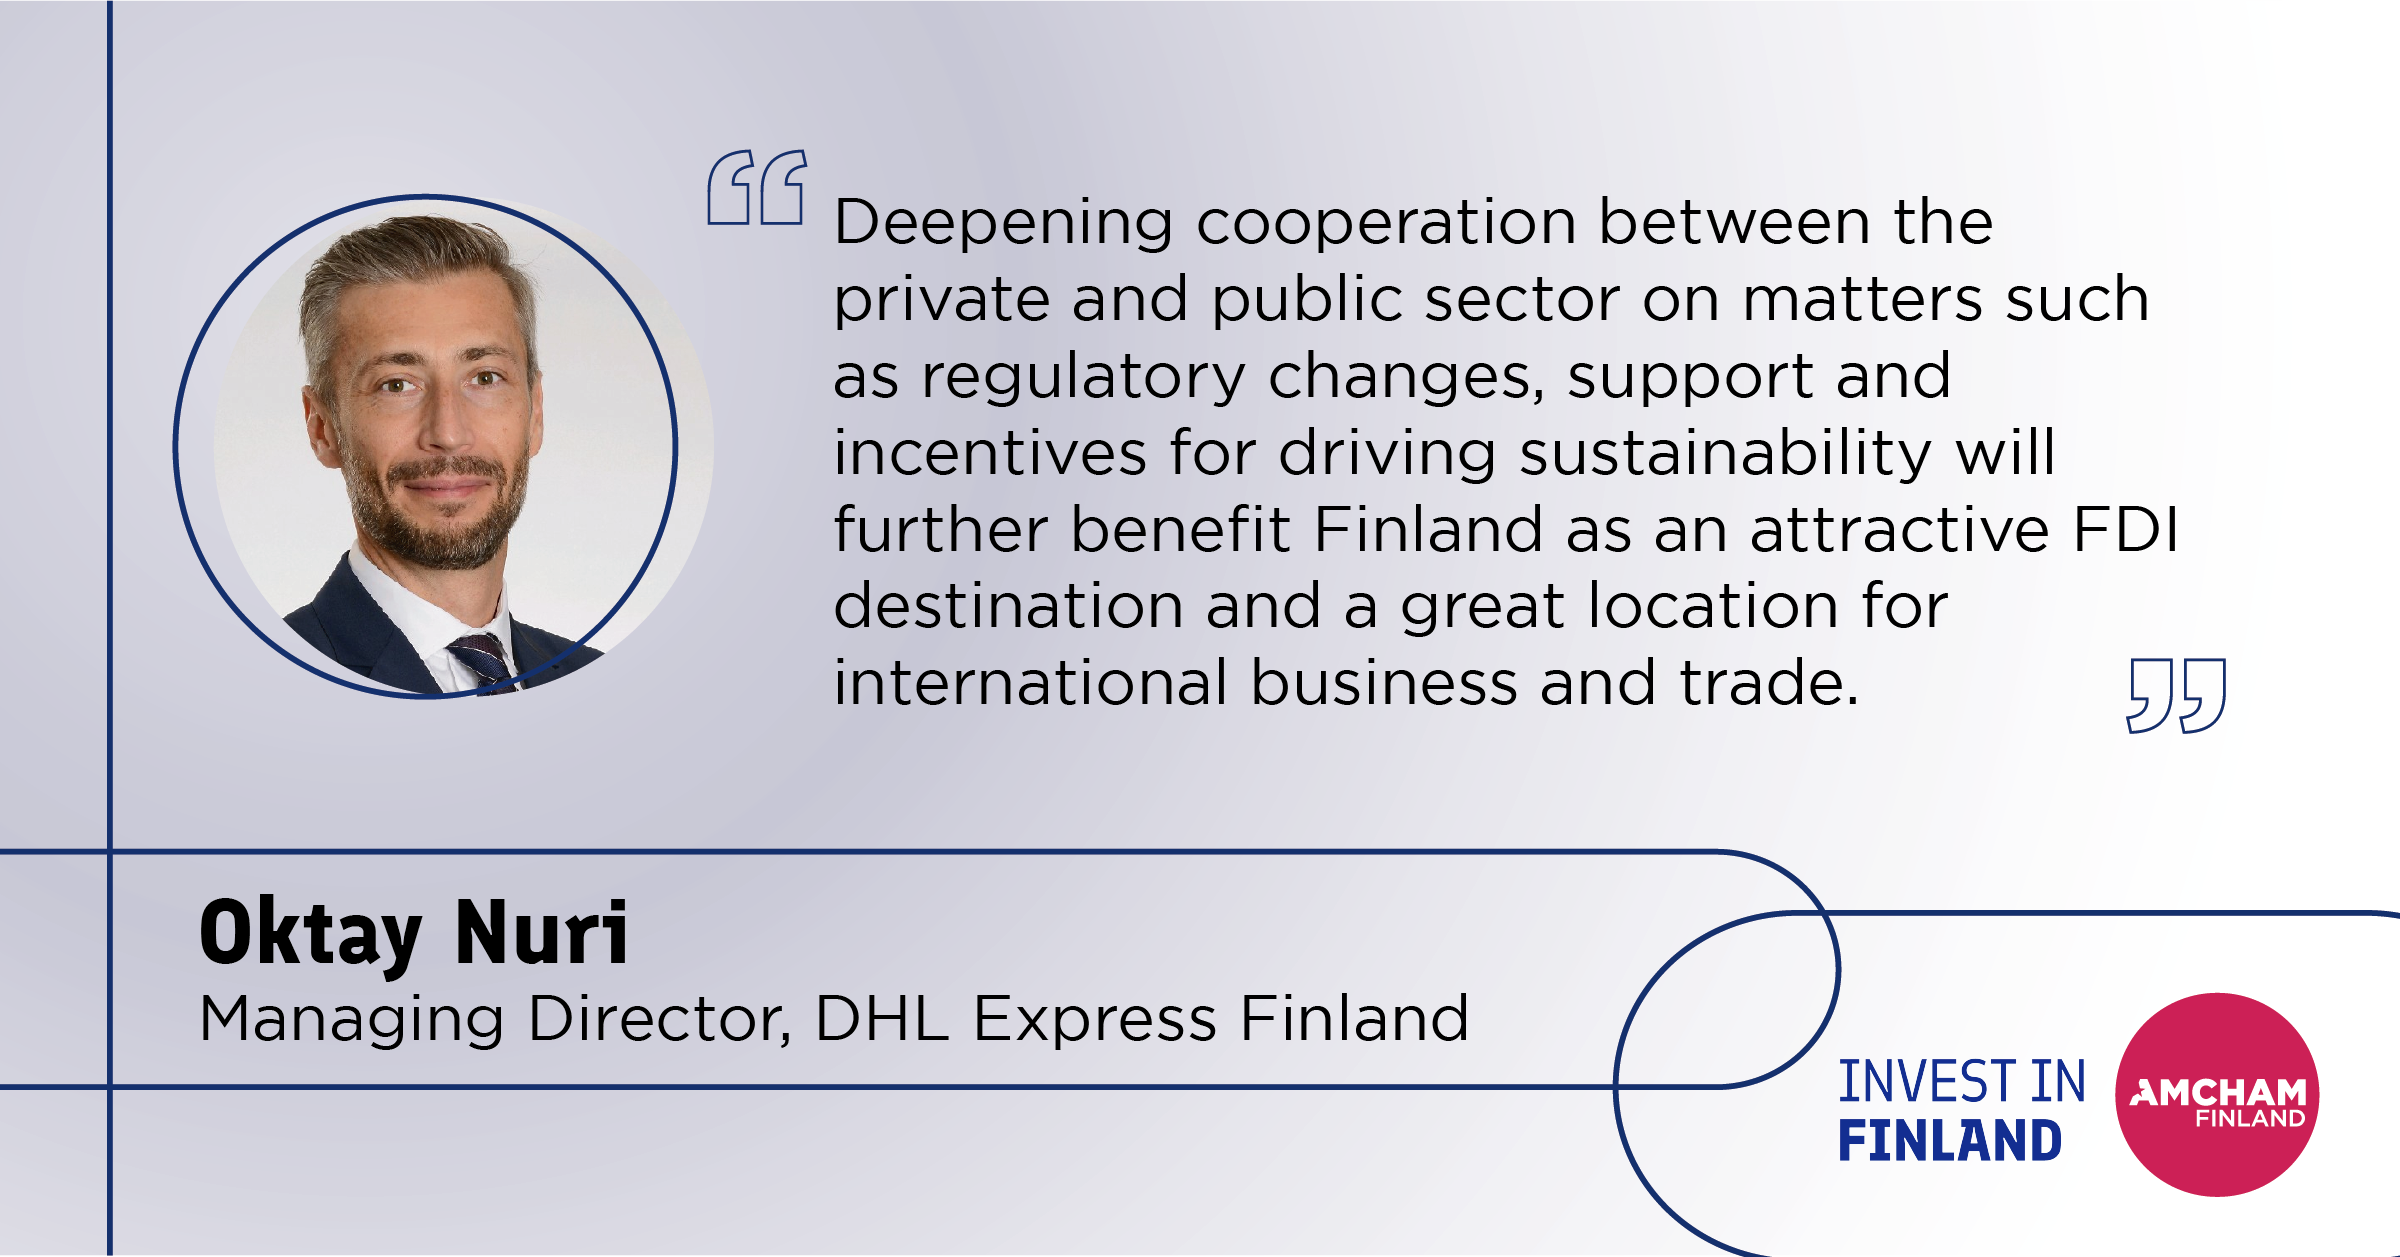 Quote by Oktay Nuri, Managing Director of DHL Express Finland